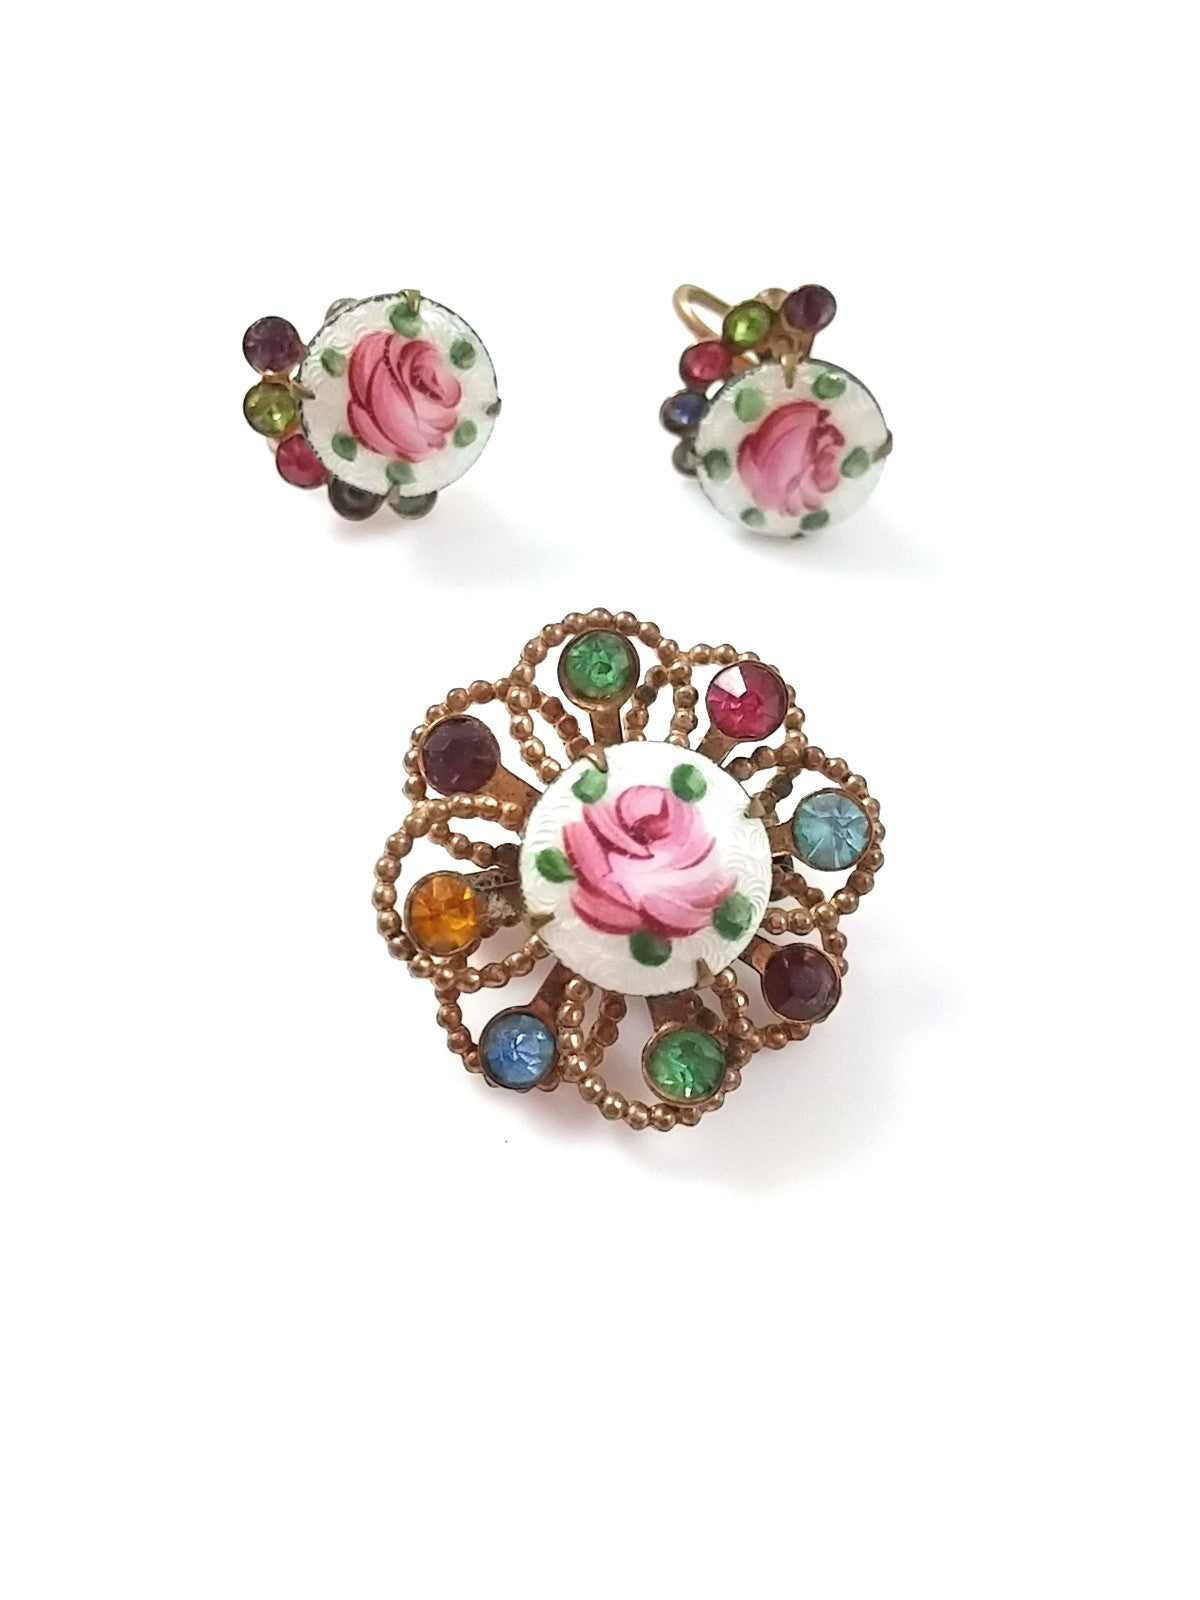 Vintage Copper Tone Brooch and Earring Set Painted Rose on Enamel Center w/ Rhinestone Accents - Dirty 30 Vintage